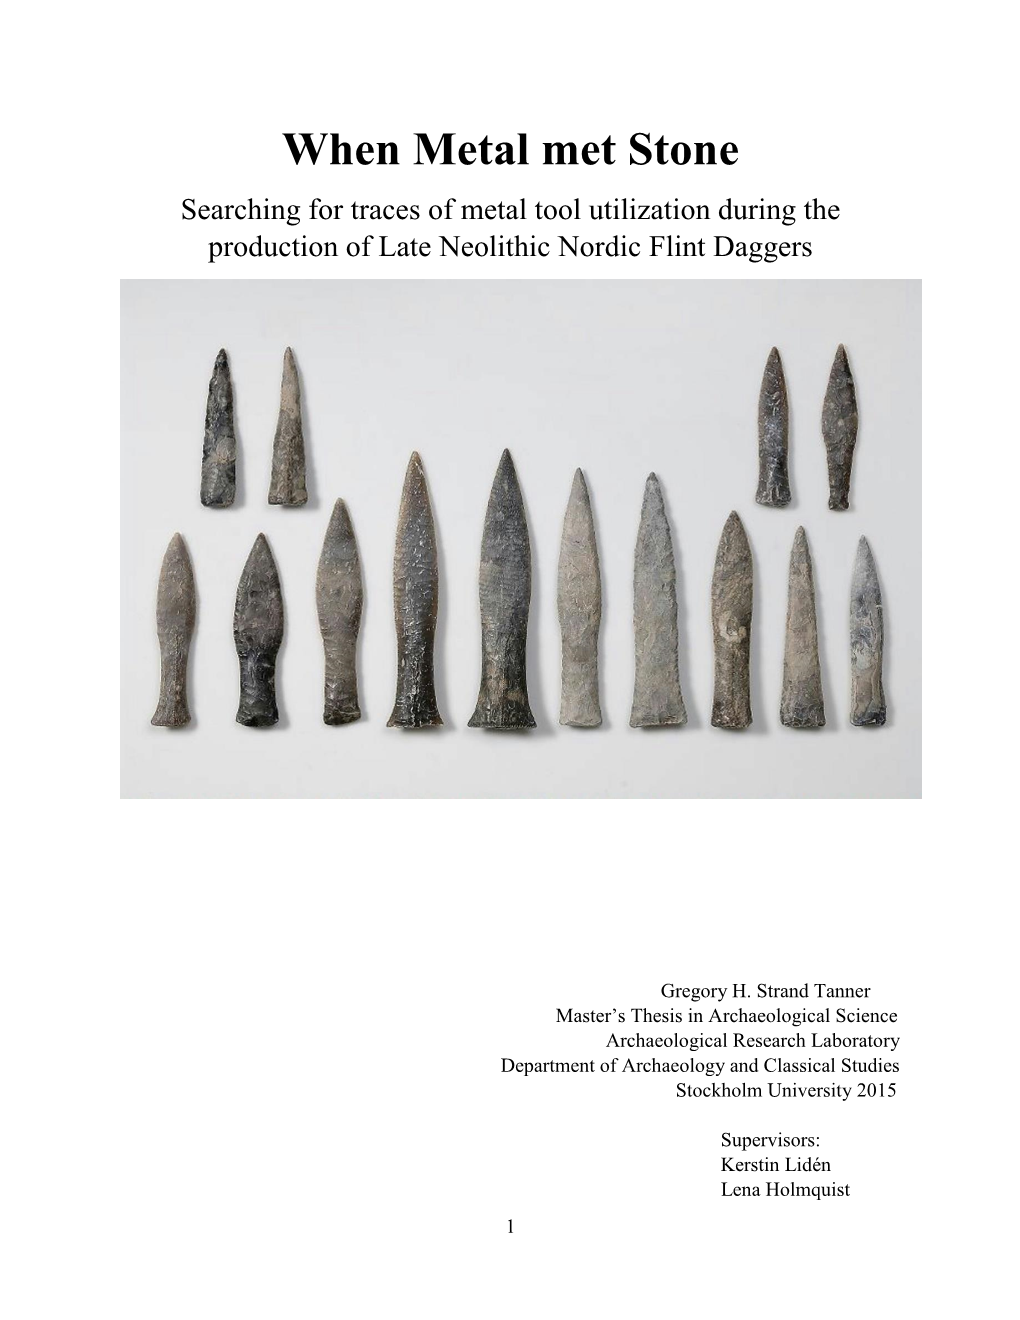 When Metal Met Stone Searching for Traces of Metal Tool Utilization During the Production of Late Neolithic Nordic Flint Daggers